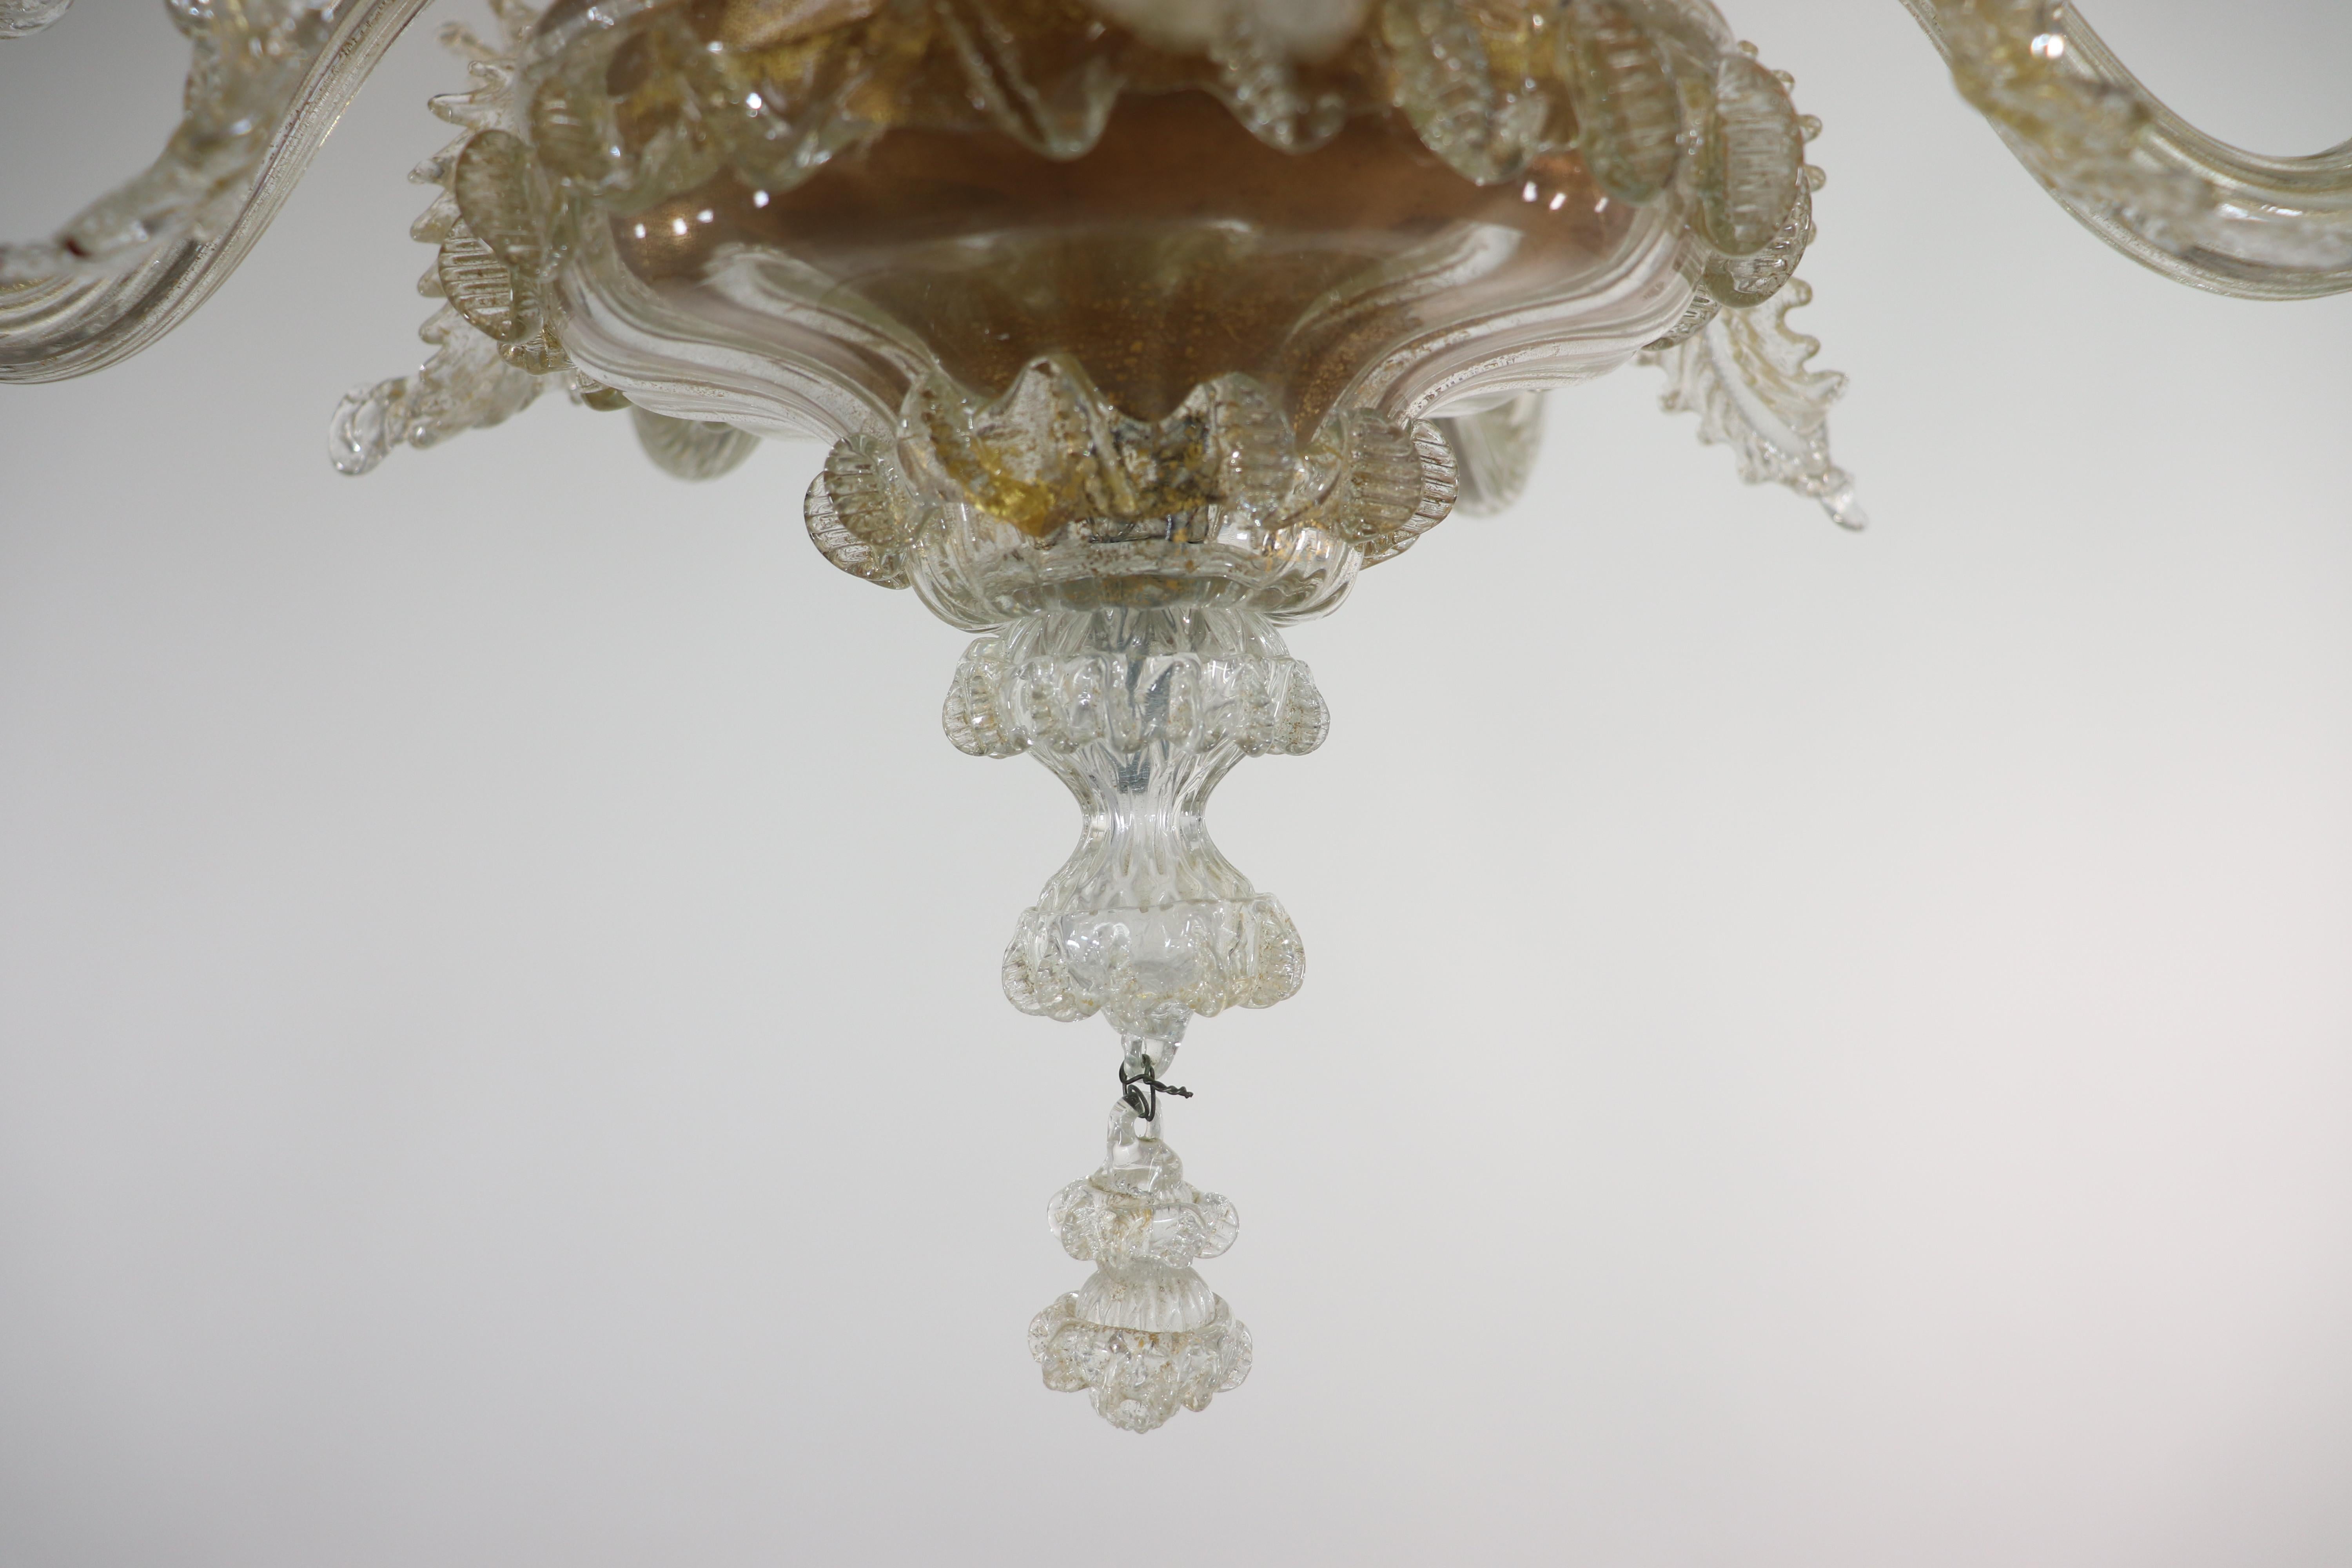  Vintage Baroque Style Gold Infused Cristallo Murano Chandelier For Sale 6